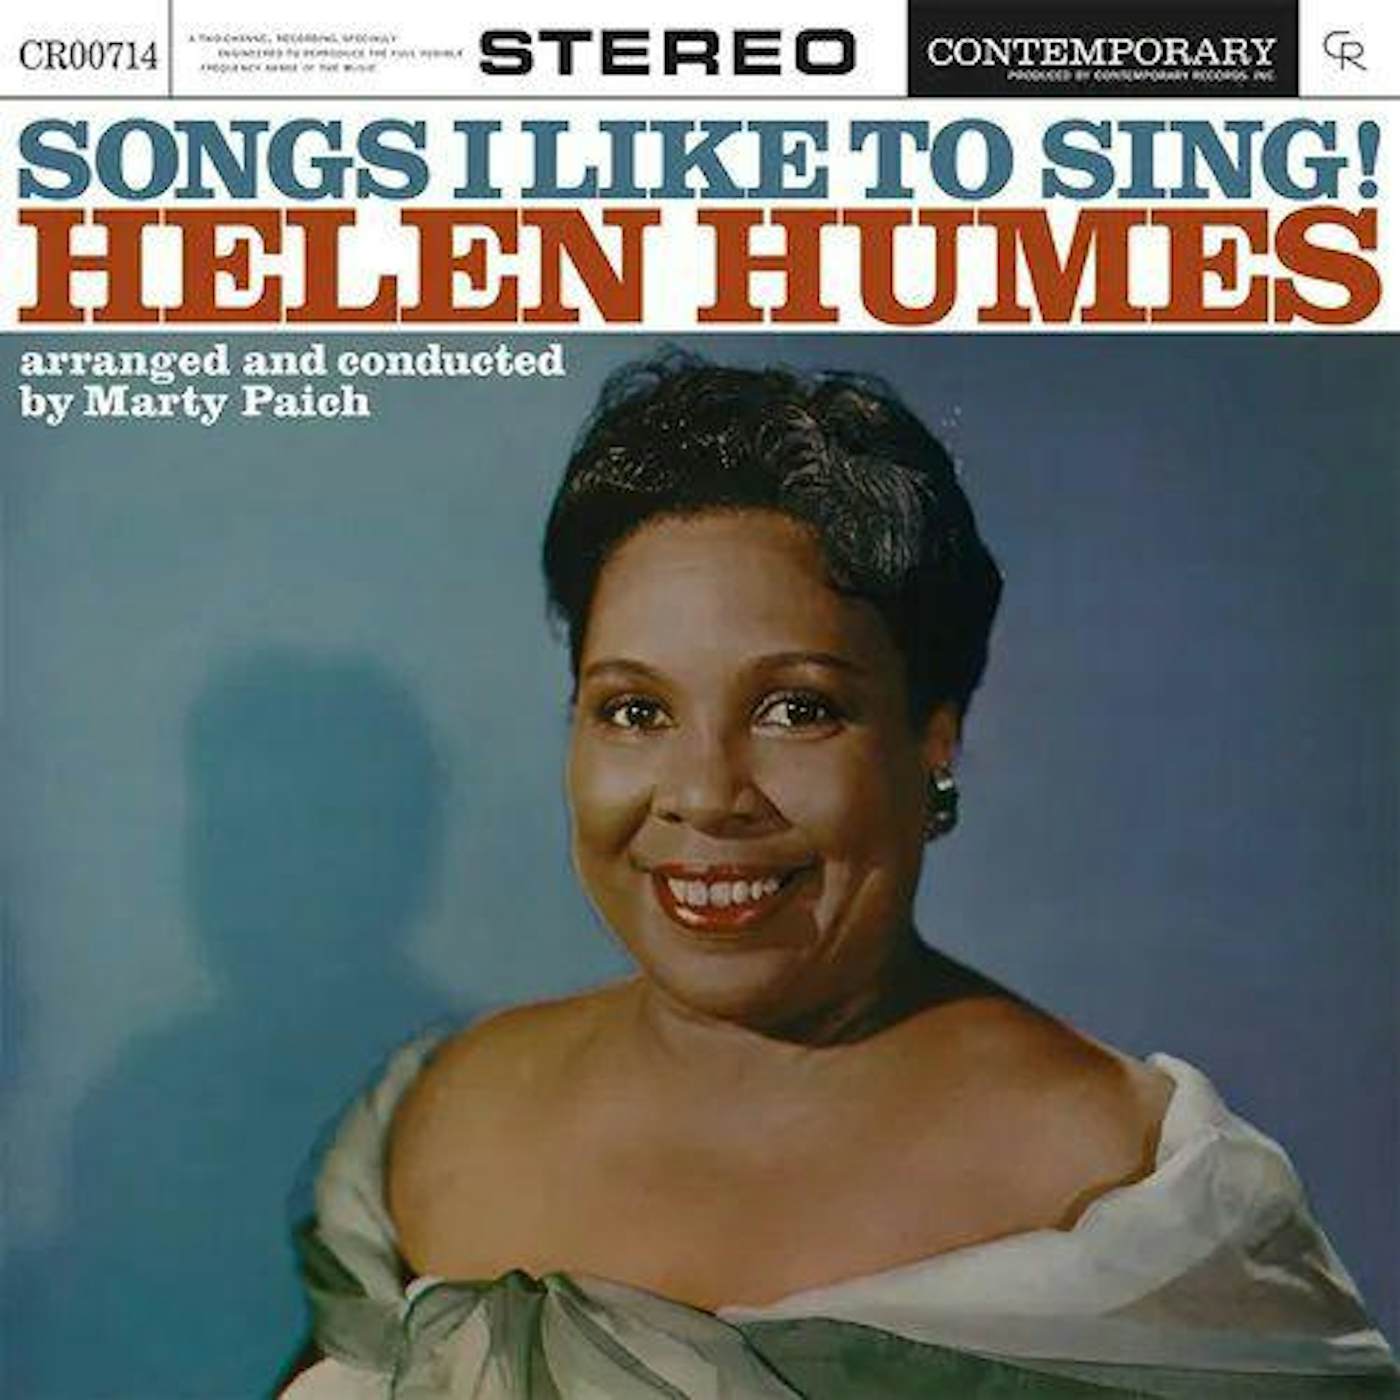 Helen Humes Songs I Like To Sing (Contemporary Records) Vinyl Record